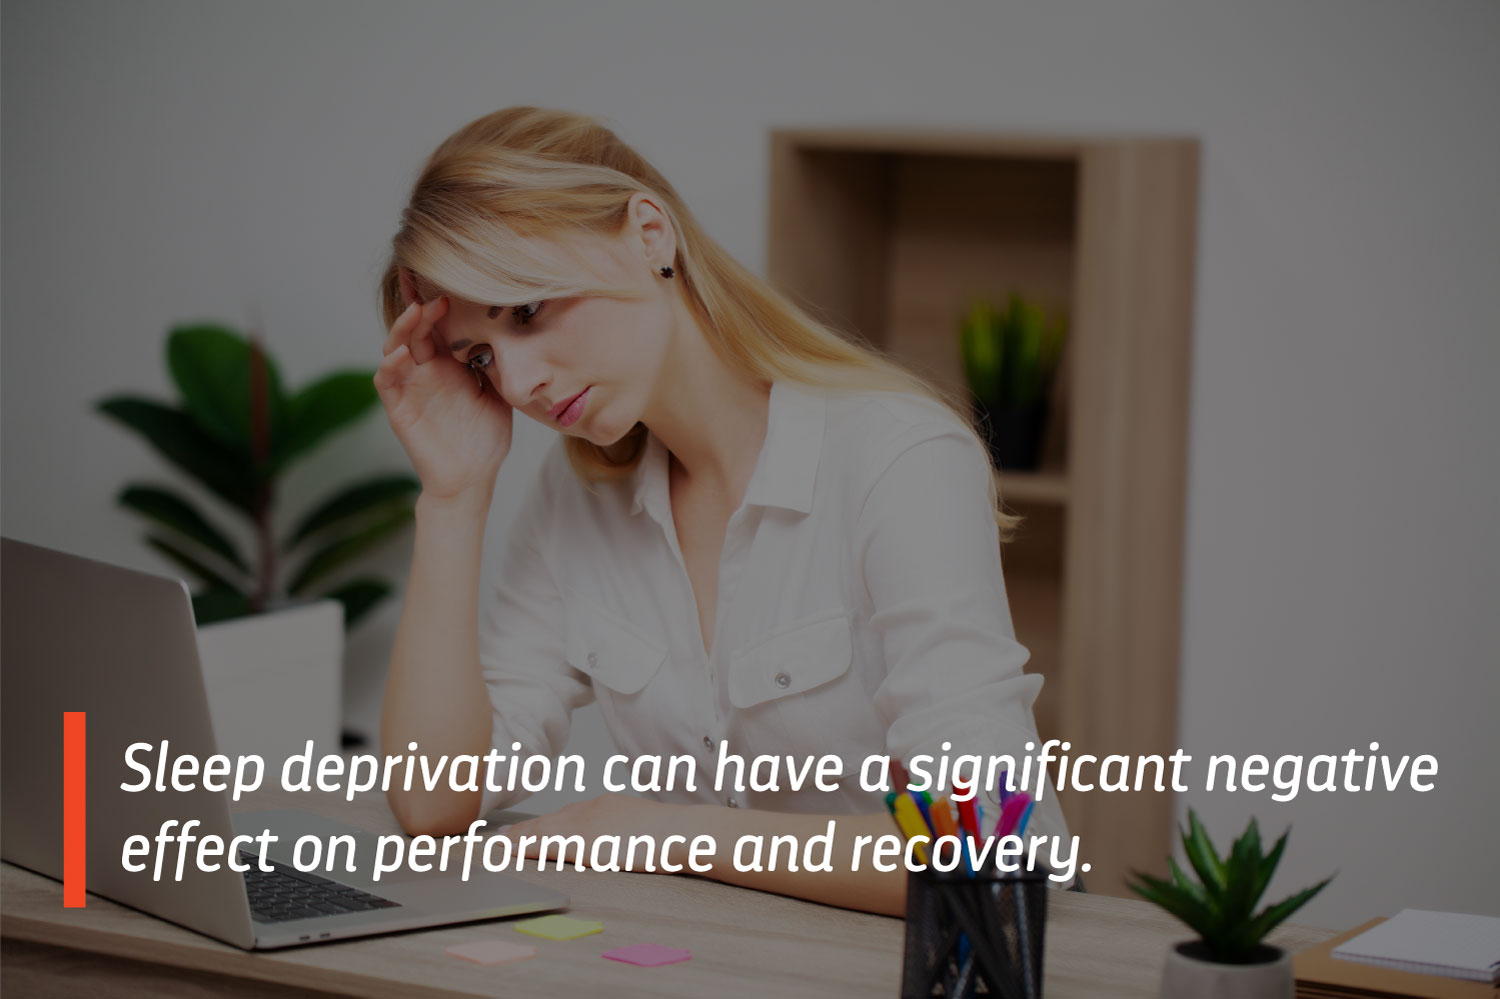 Sleep deprivation can have a significant negative effect on performance and recovery